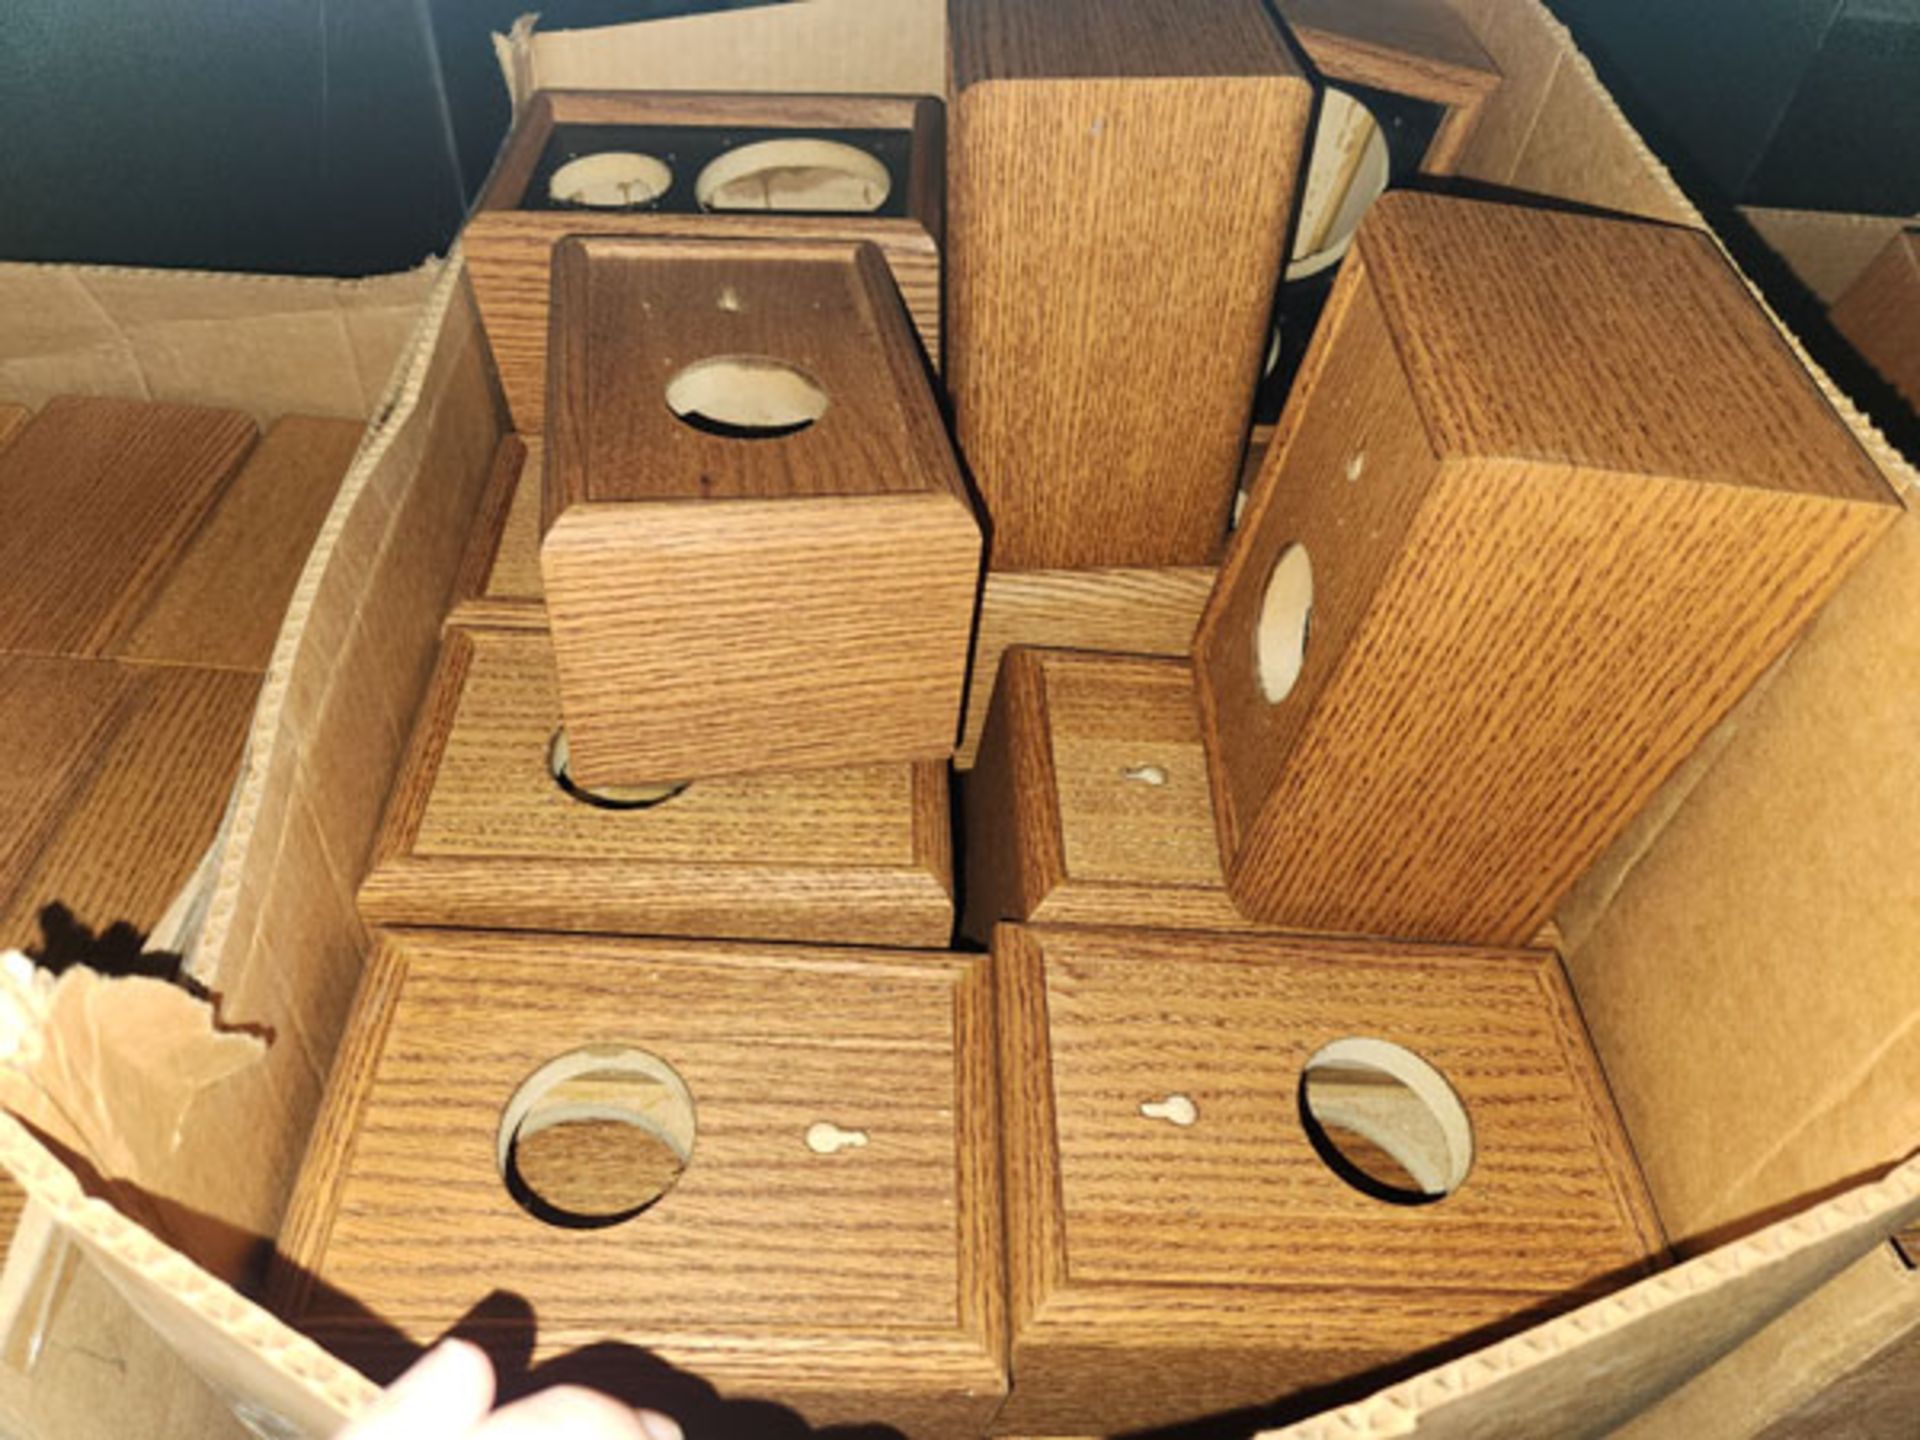 6 BOXES OF WOOD SPEAKER BOXES APPROX 5" X 4-1/2" X 7-1/2" - Image 4 of 7